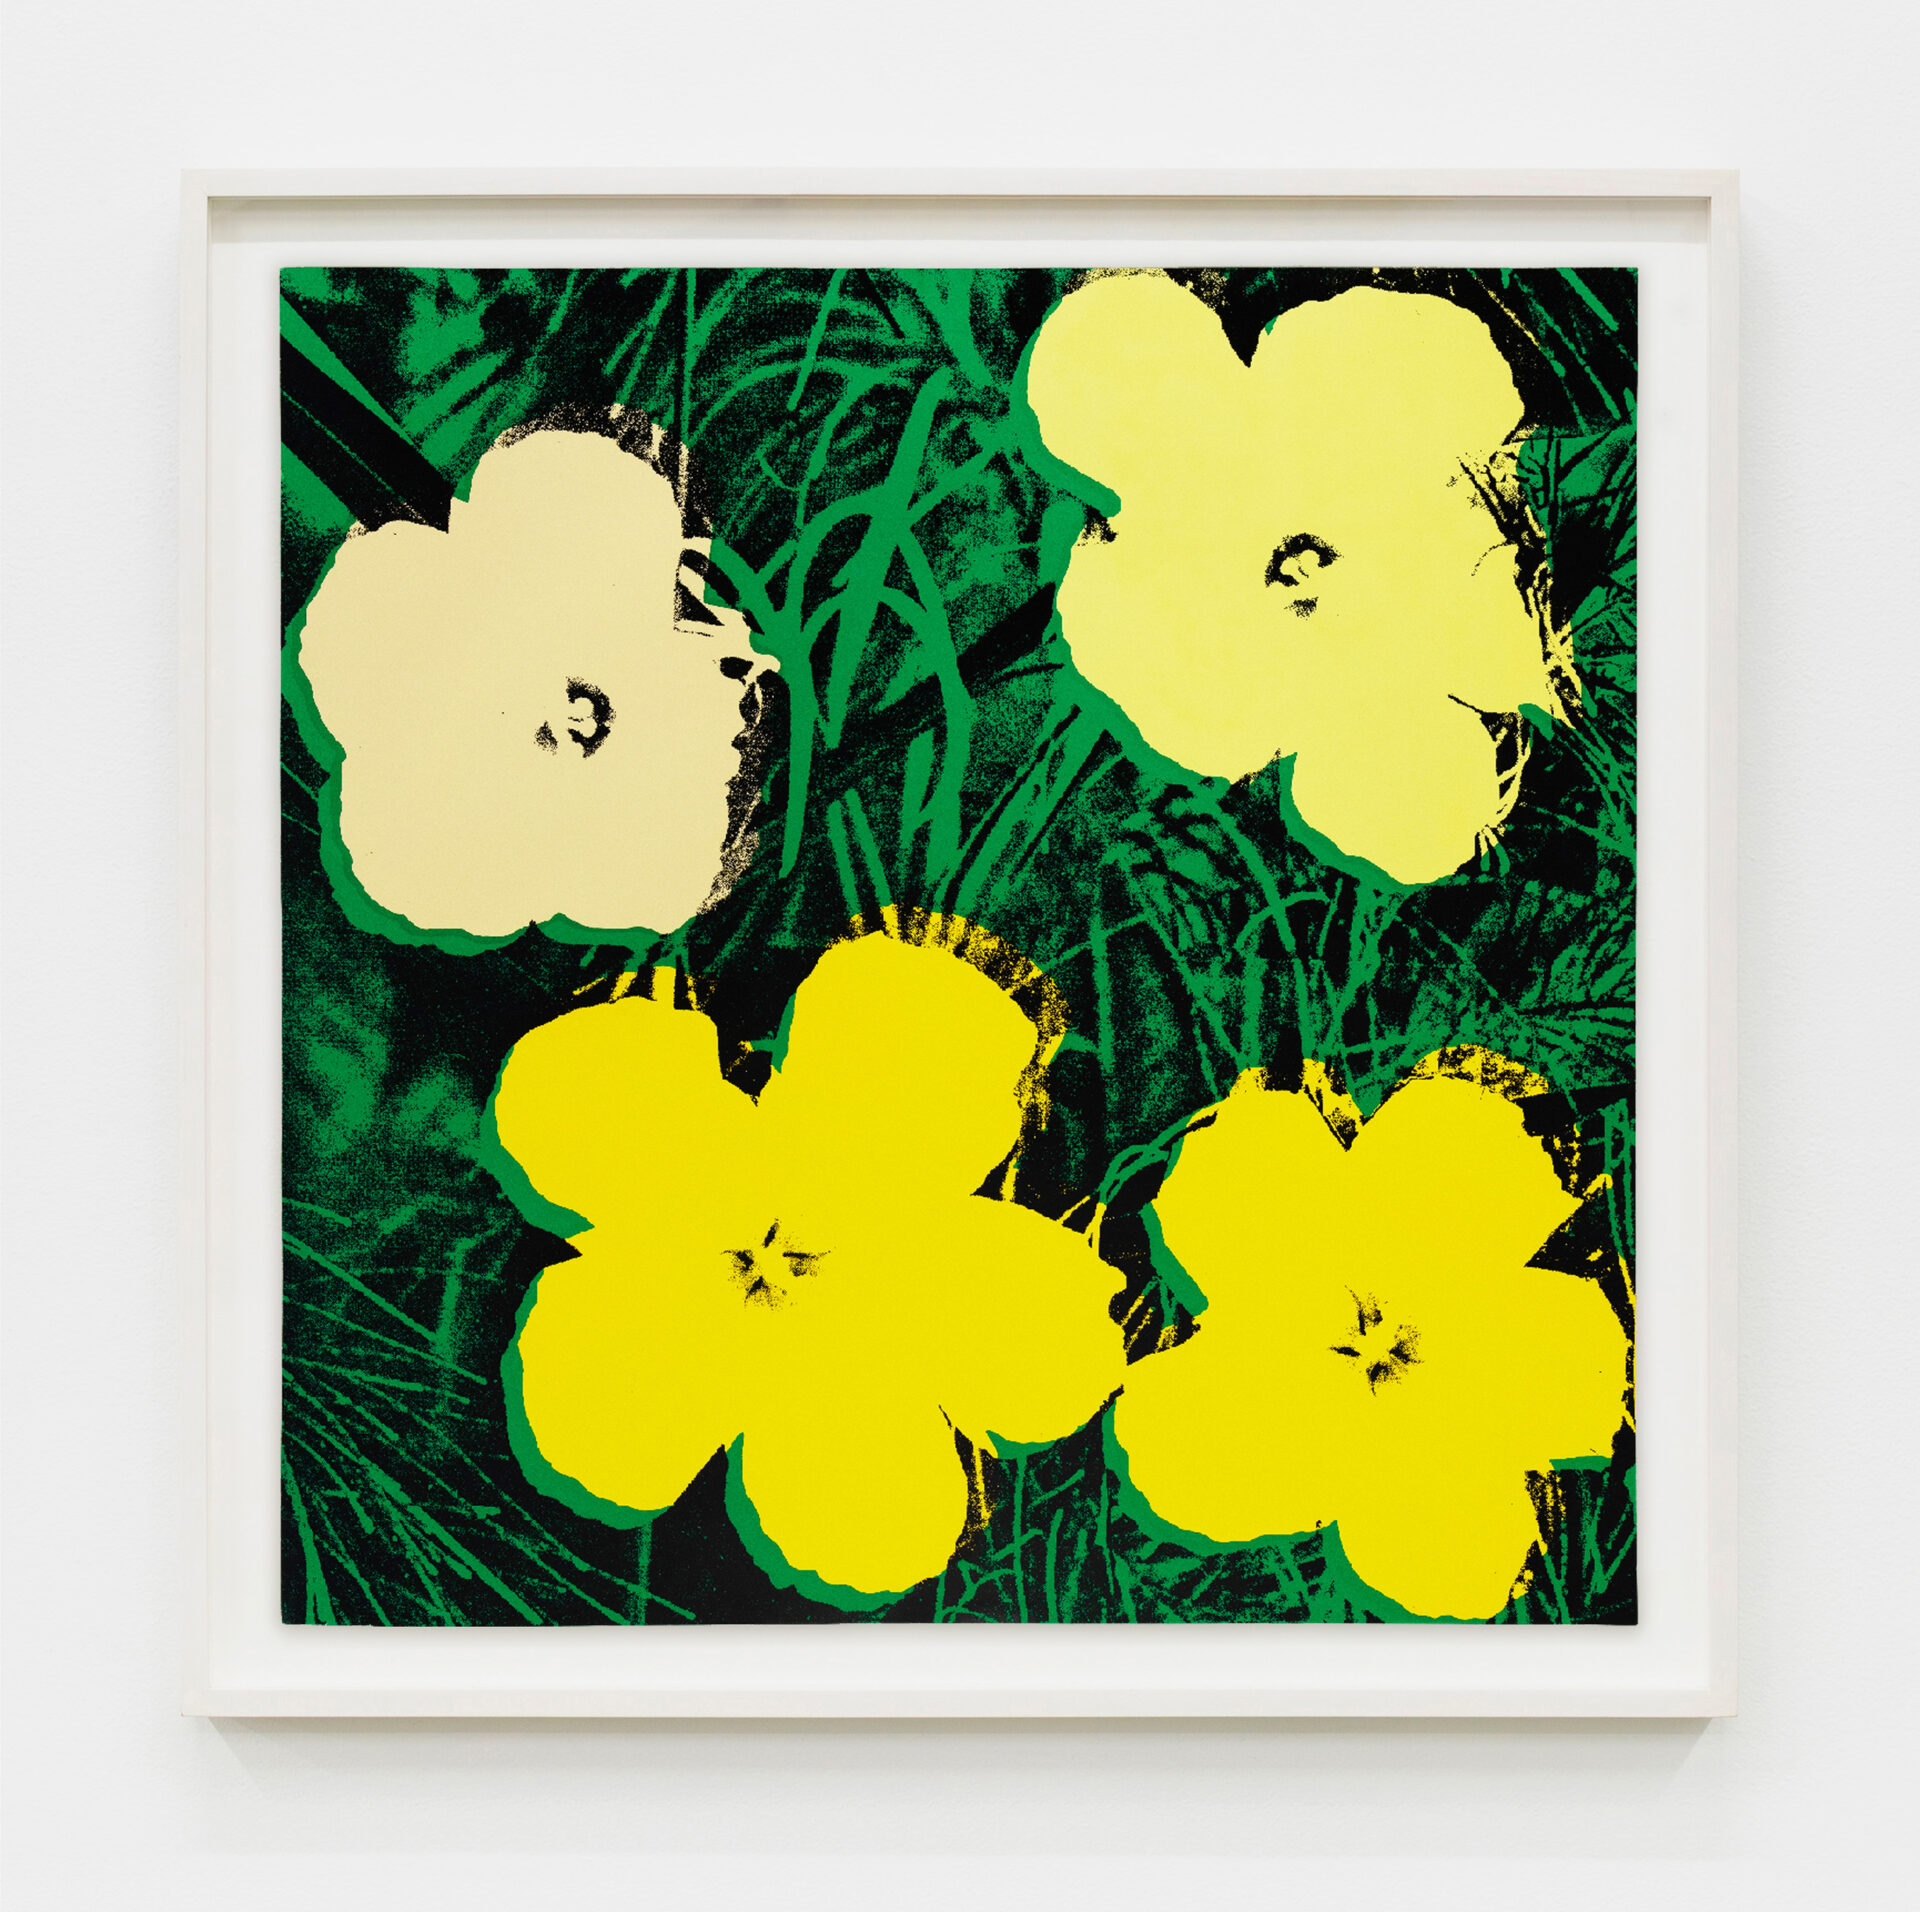 Andy Warhol Flowers (F. & S. II.72), 1970 Screenprint Paper Dimensions: 36 x 36 inches (91.4 x 91.4 cm) Framed Dimensions: 39 1/8 x 39 1/8 inches (99.4 x 99.4 cm) Edition of 250